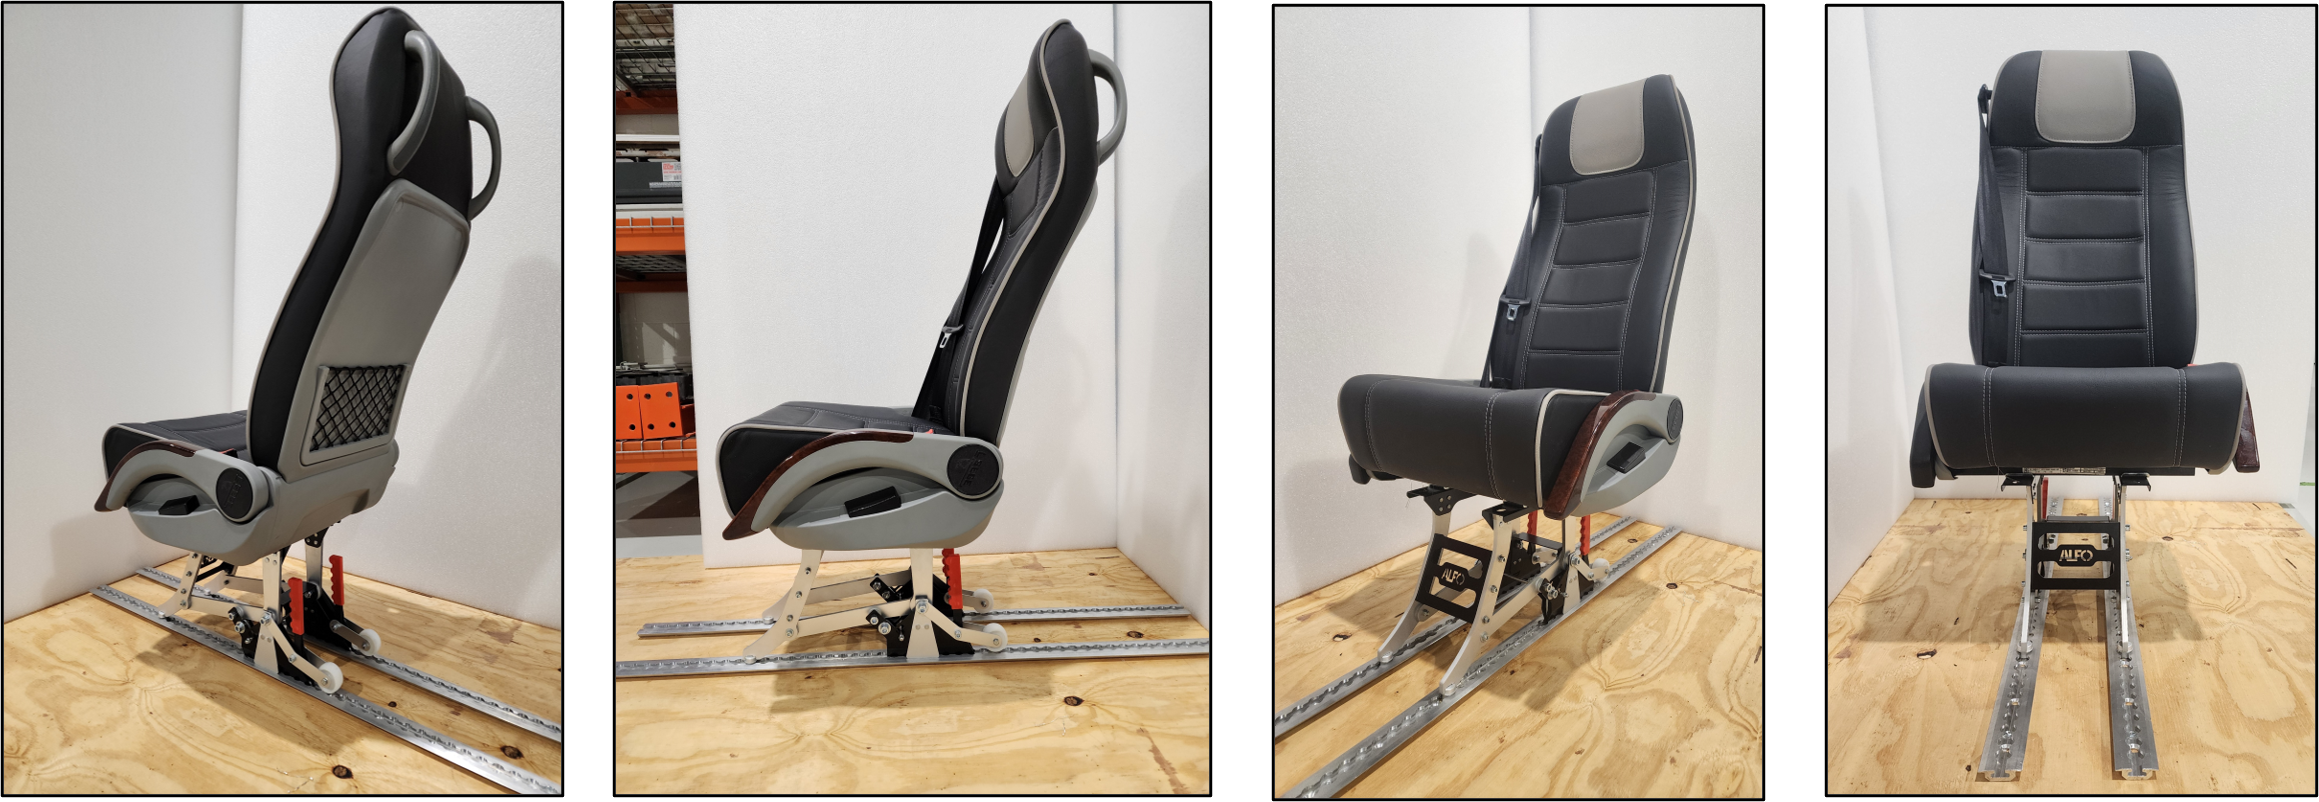 SEGE SINGLE SEAT WITH QUICK RELEASE MECHANISM & STAND-ALONE L-TRACK_8359